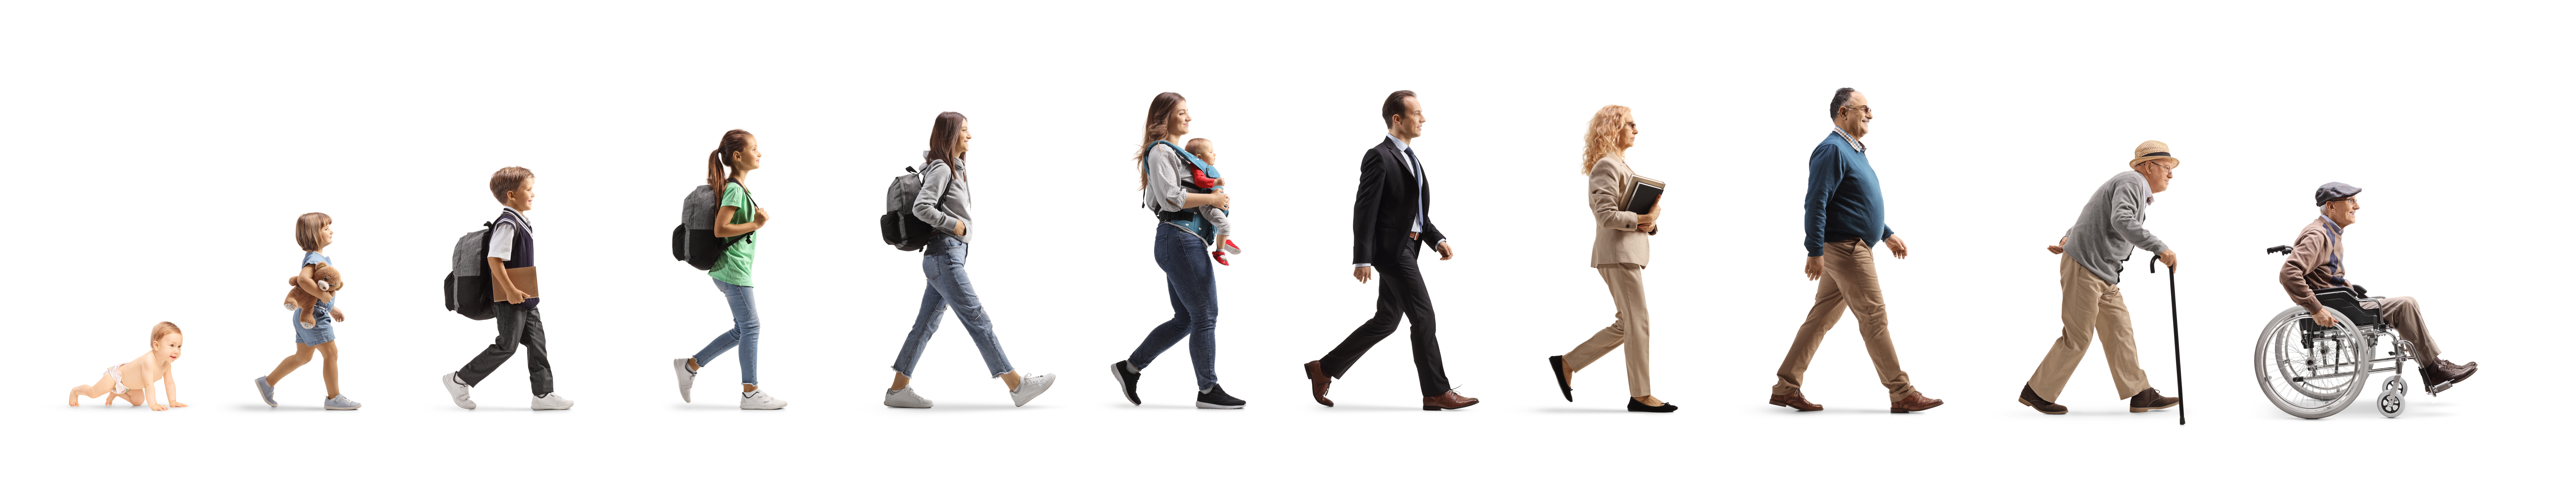 Older workers Full length profile shot of a group of people walking, from a baby crawling to a senior, isolated on white background